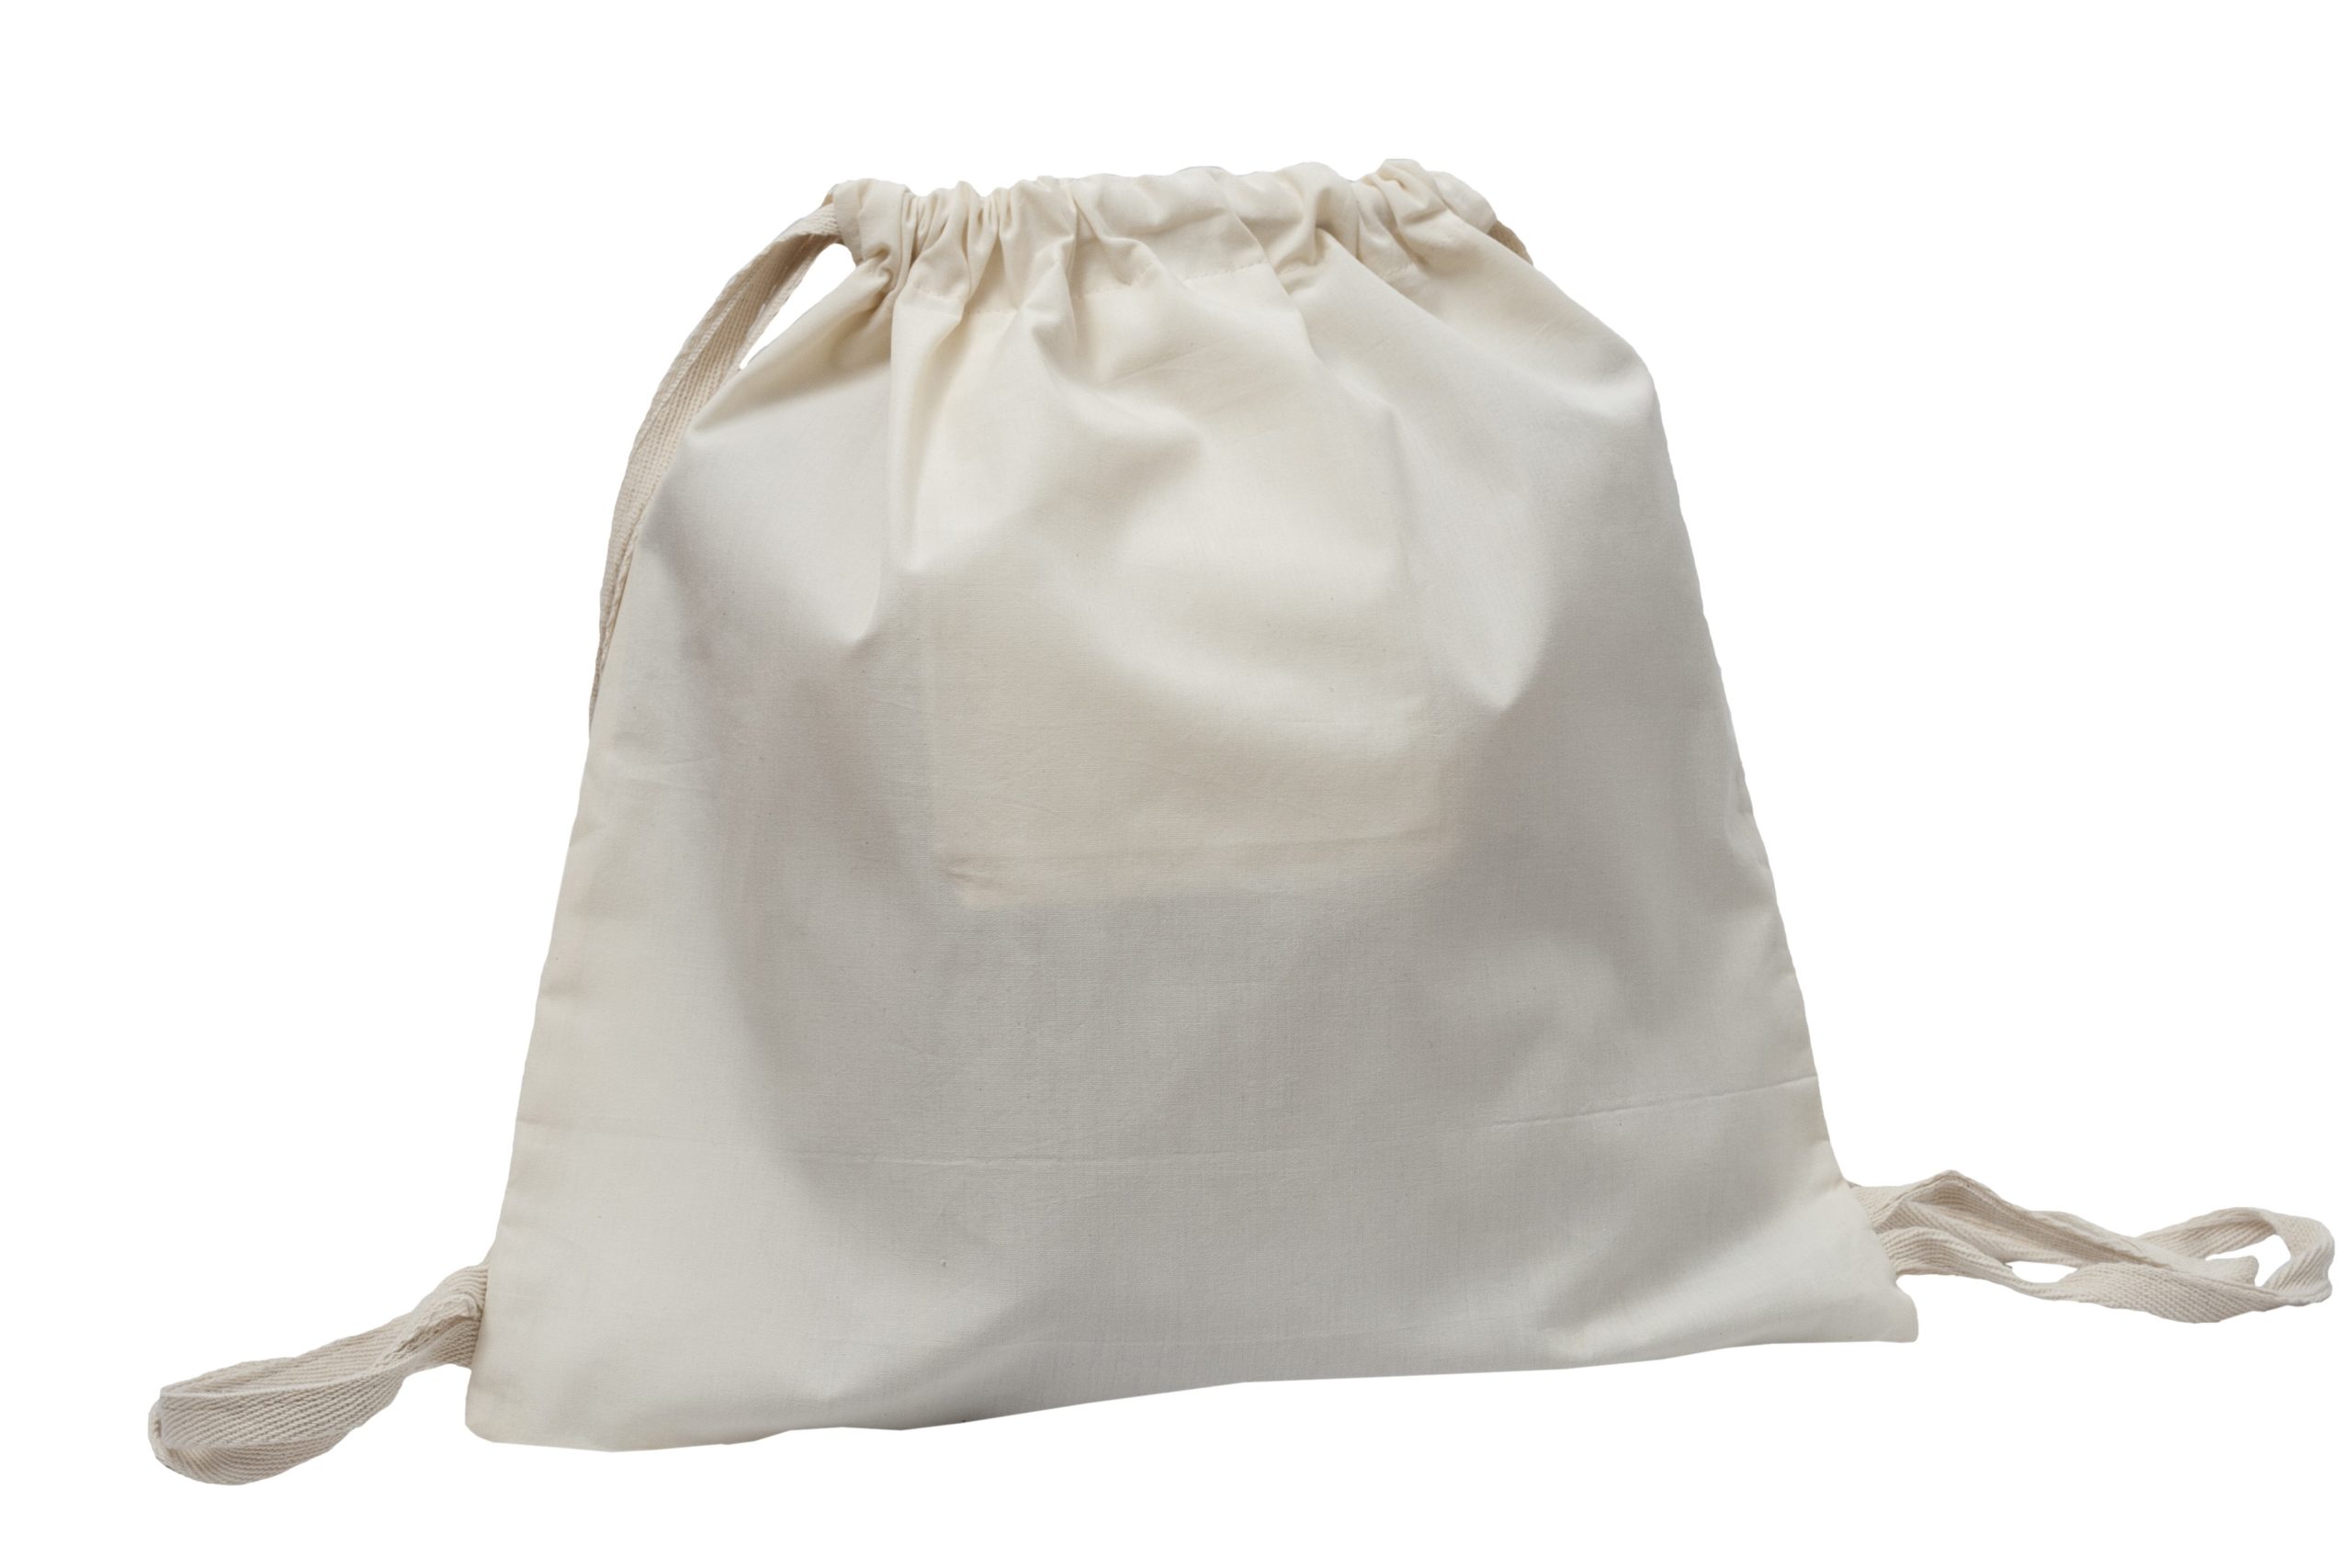 Blue Drawstring Bag Template Vector On White Background Stock Illustration  - Download Image Now - iStock